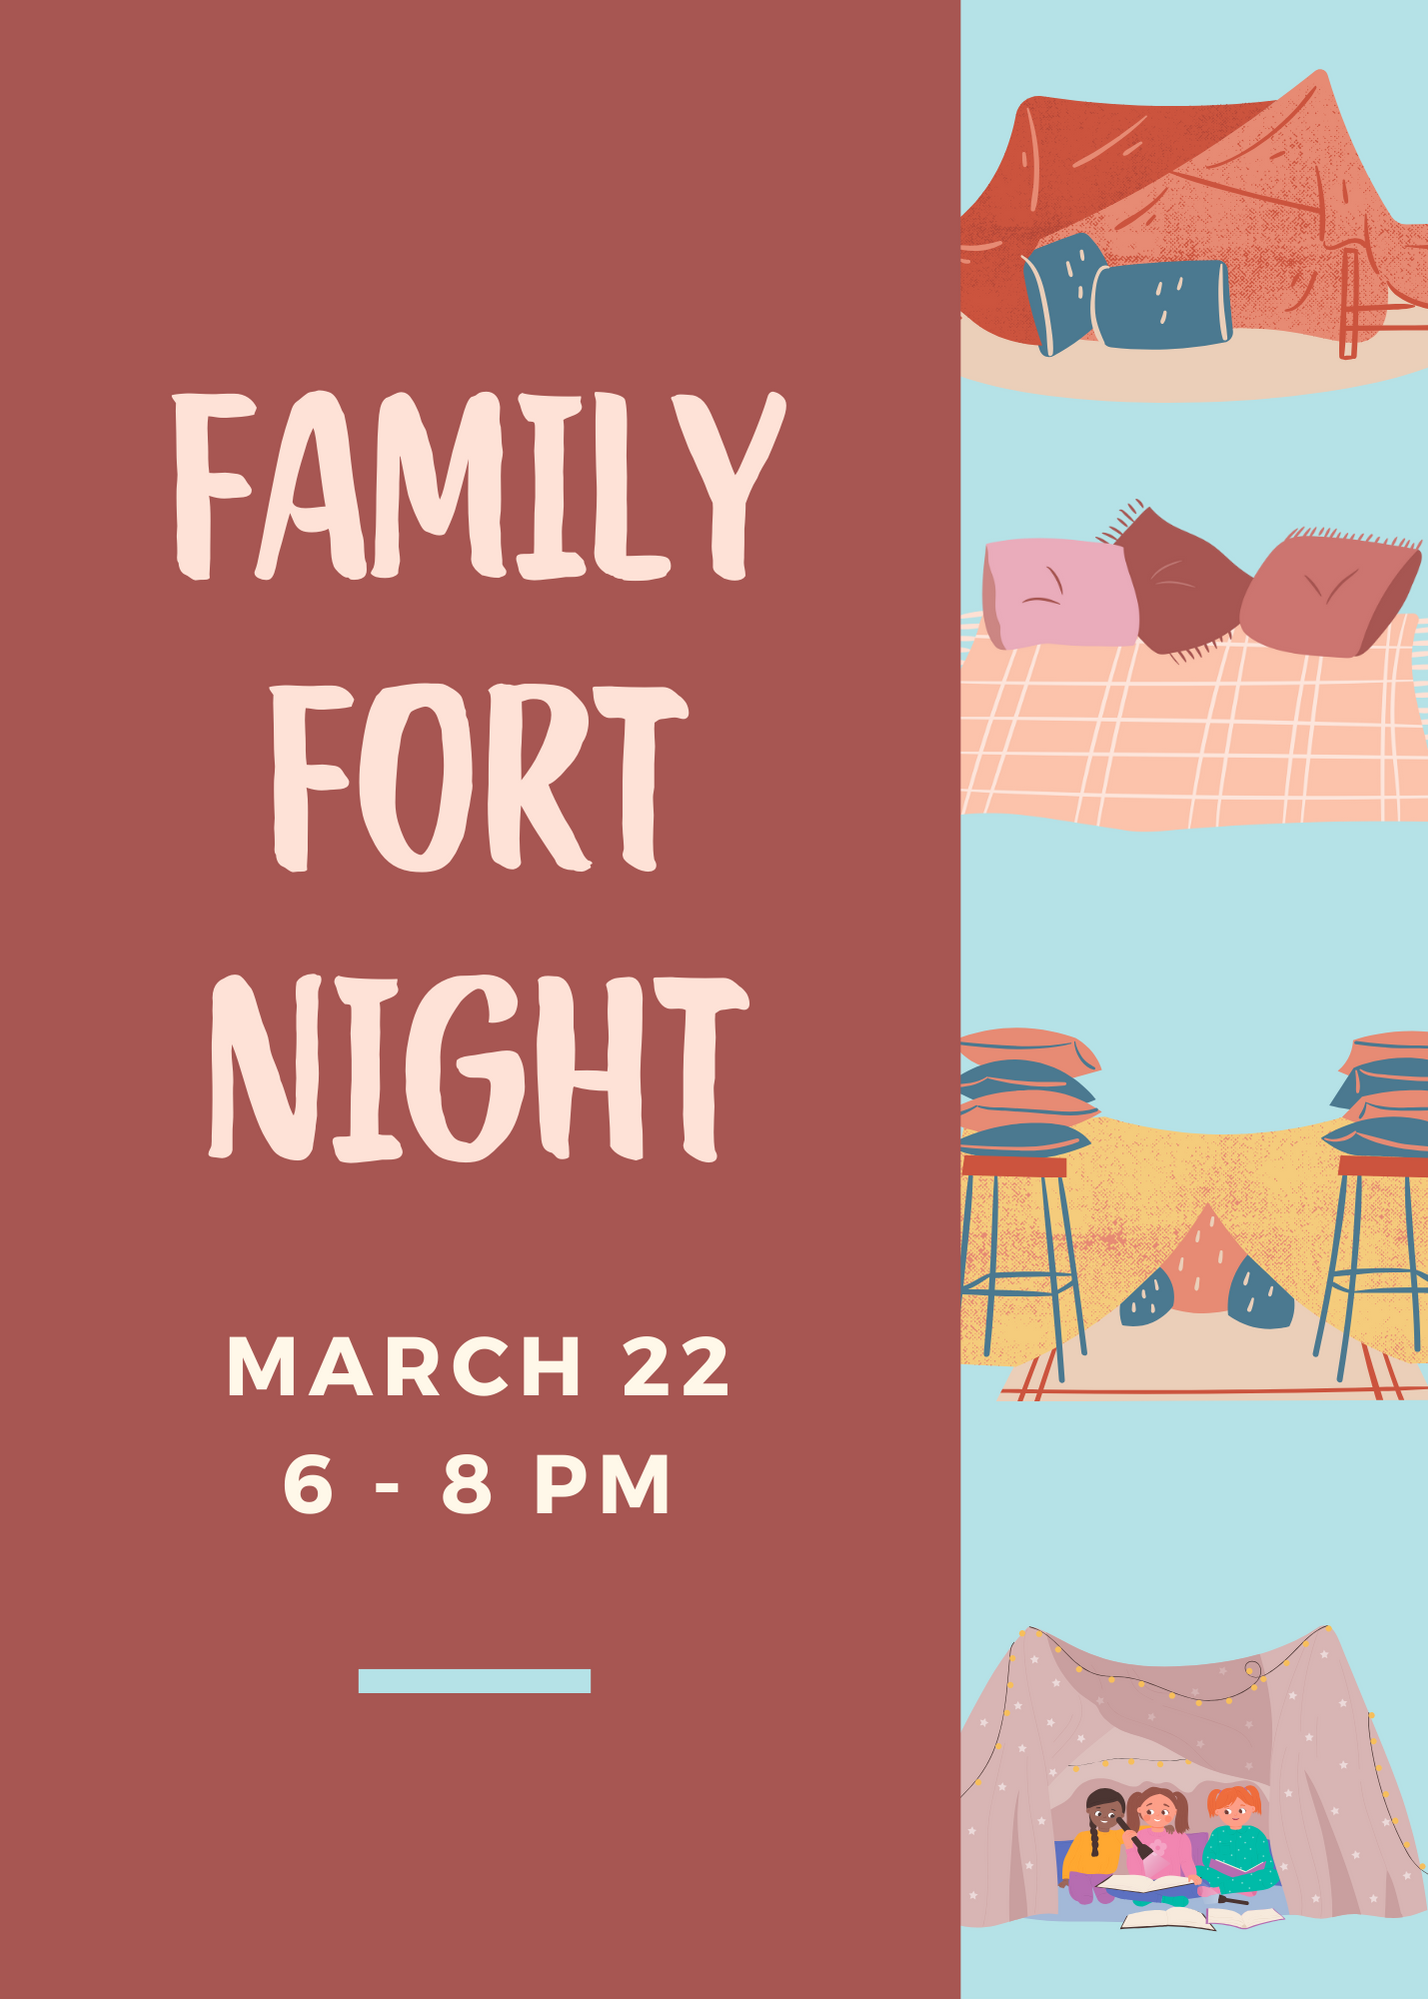 Family Fort Night March 22 6-8 PM